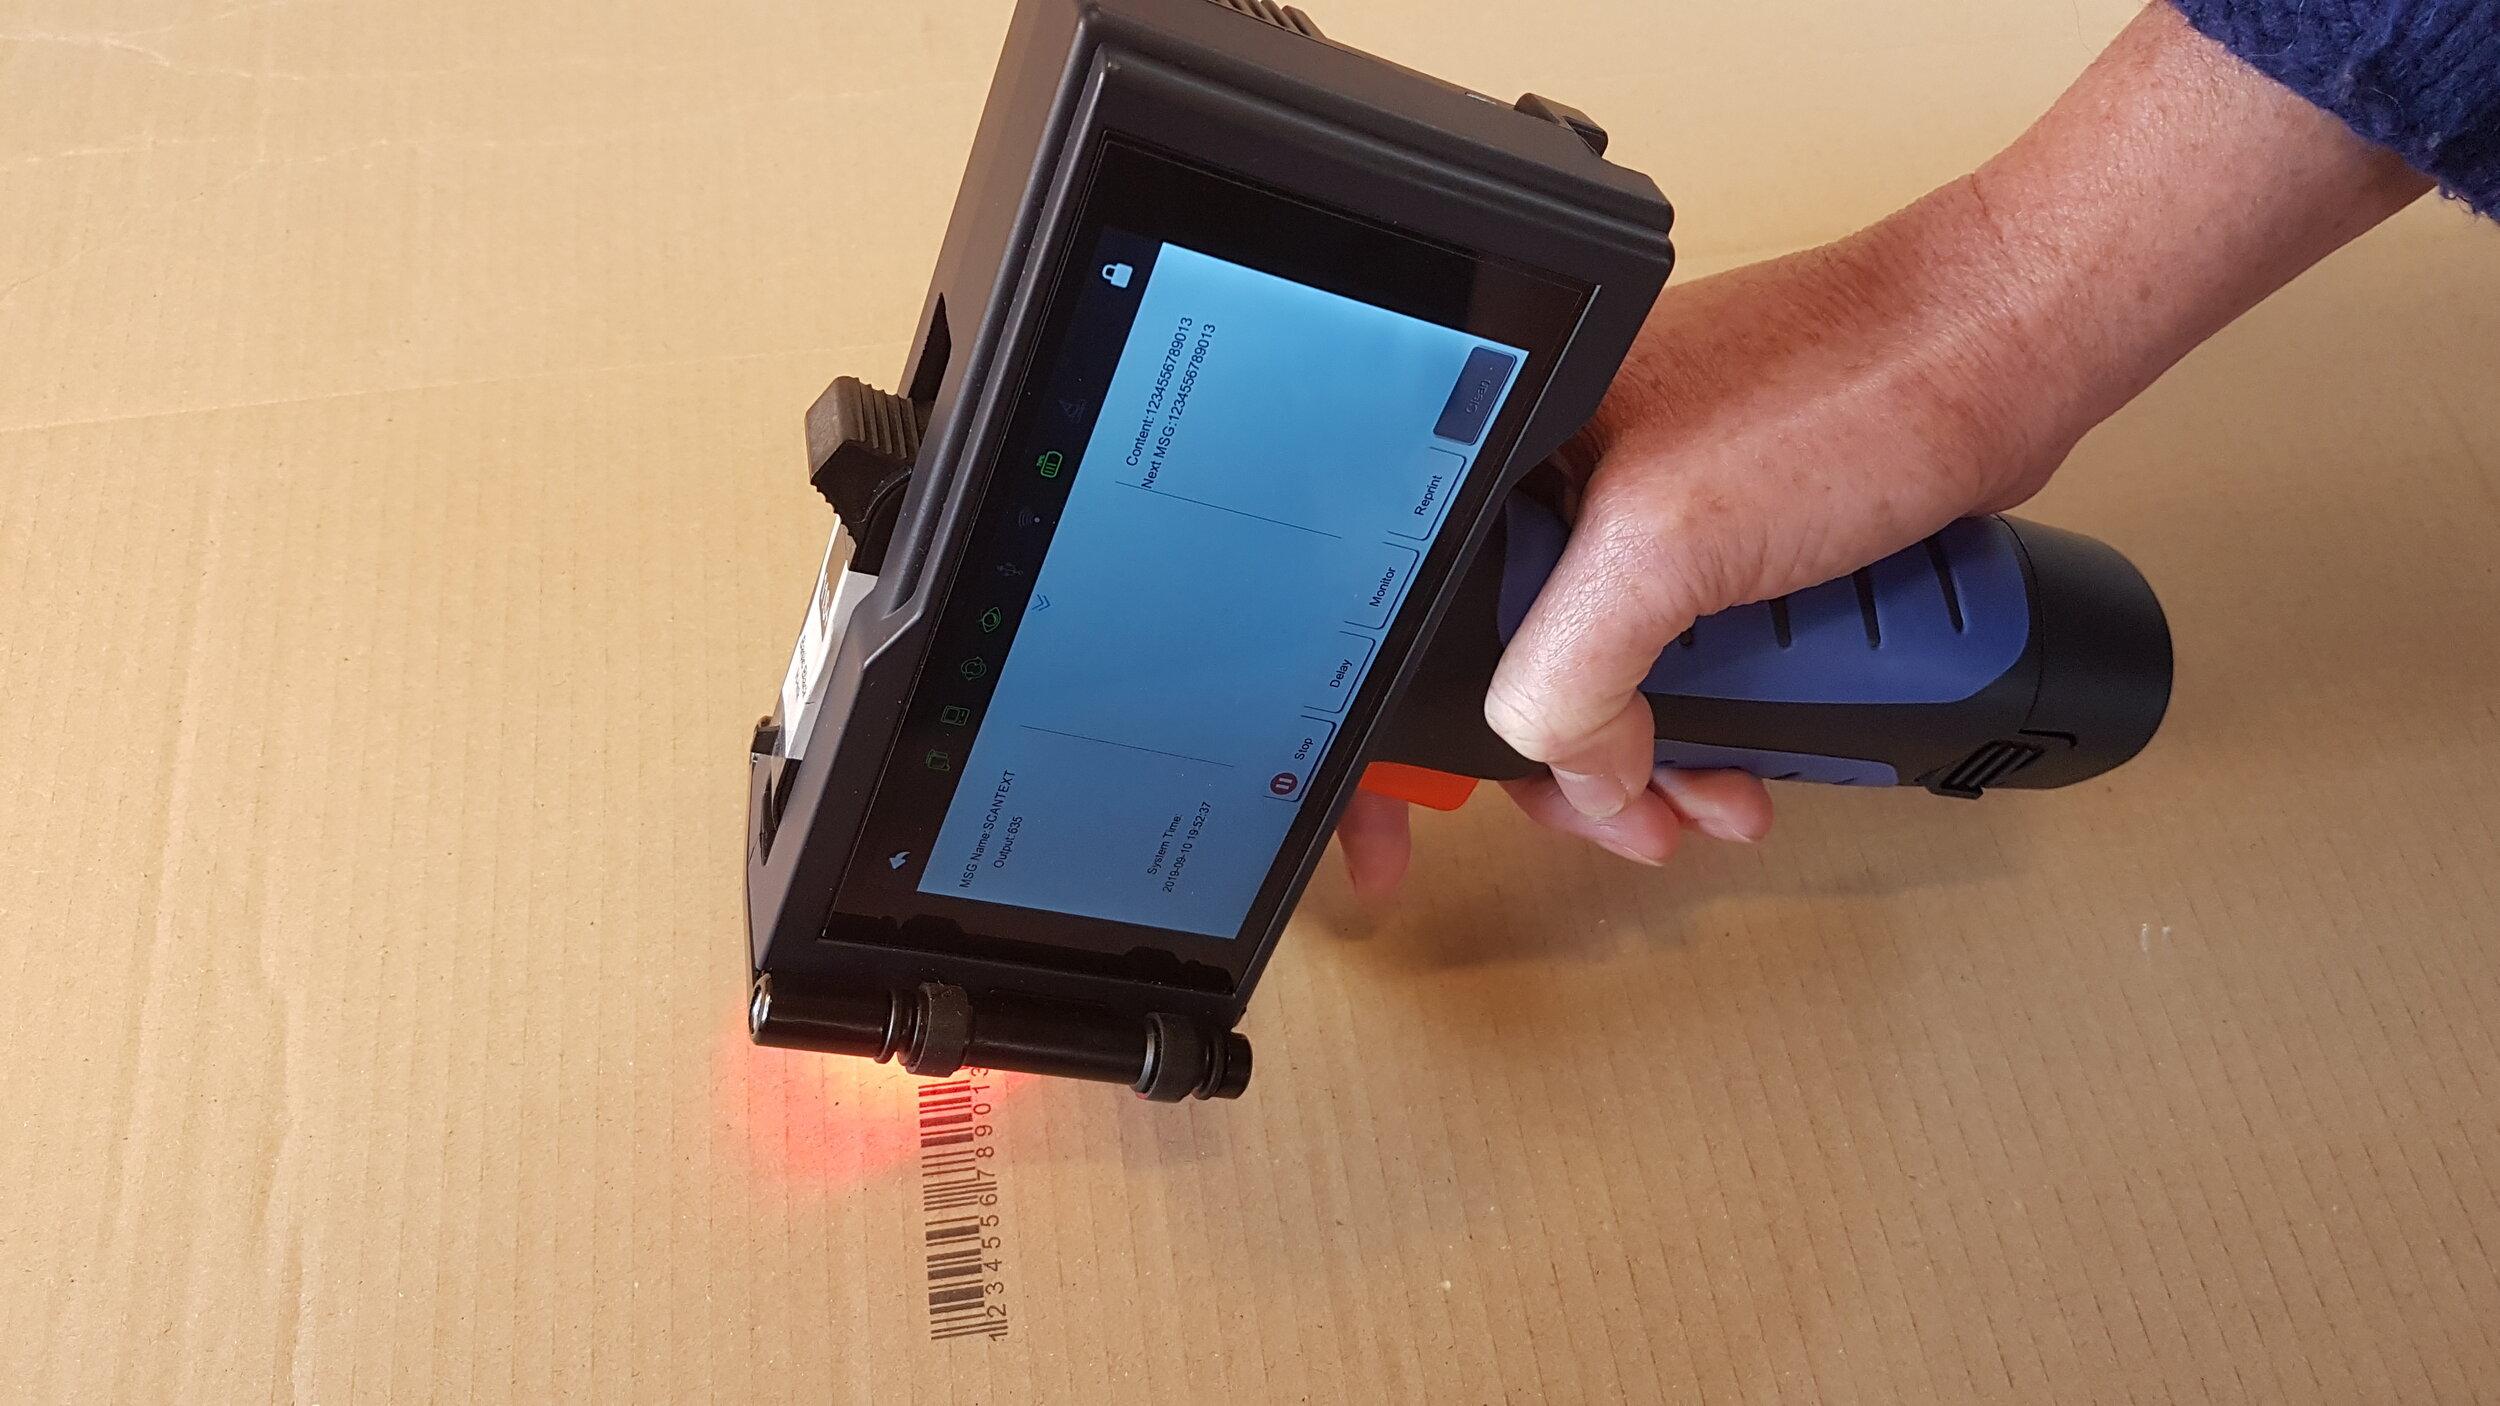 Sojet’s V1H handheld printer includes an internal barcode scanner so can reproduce barcode information in a variety of formats